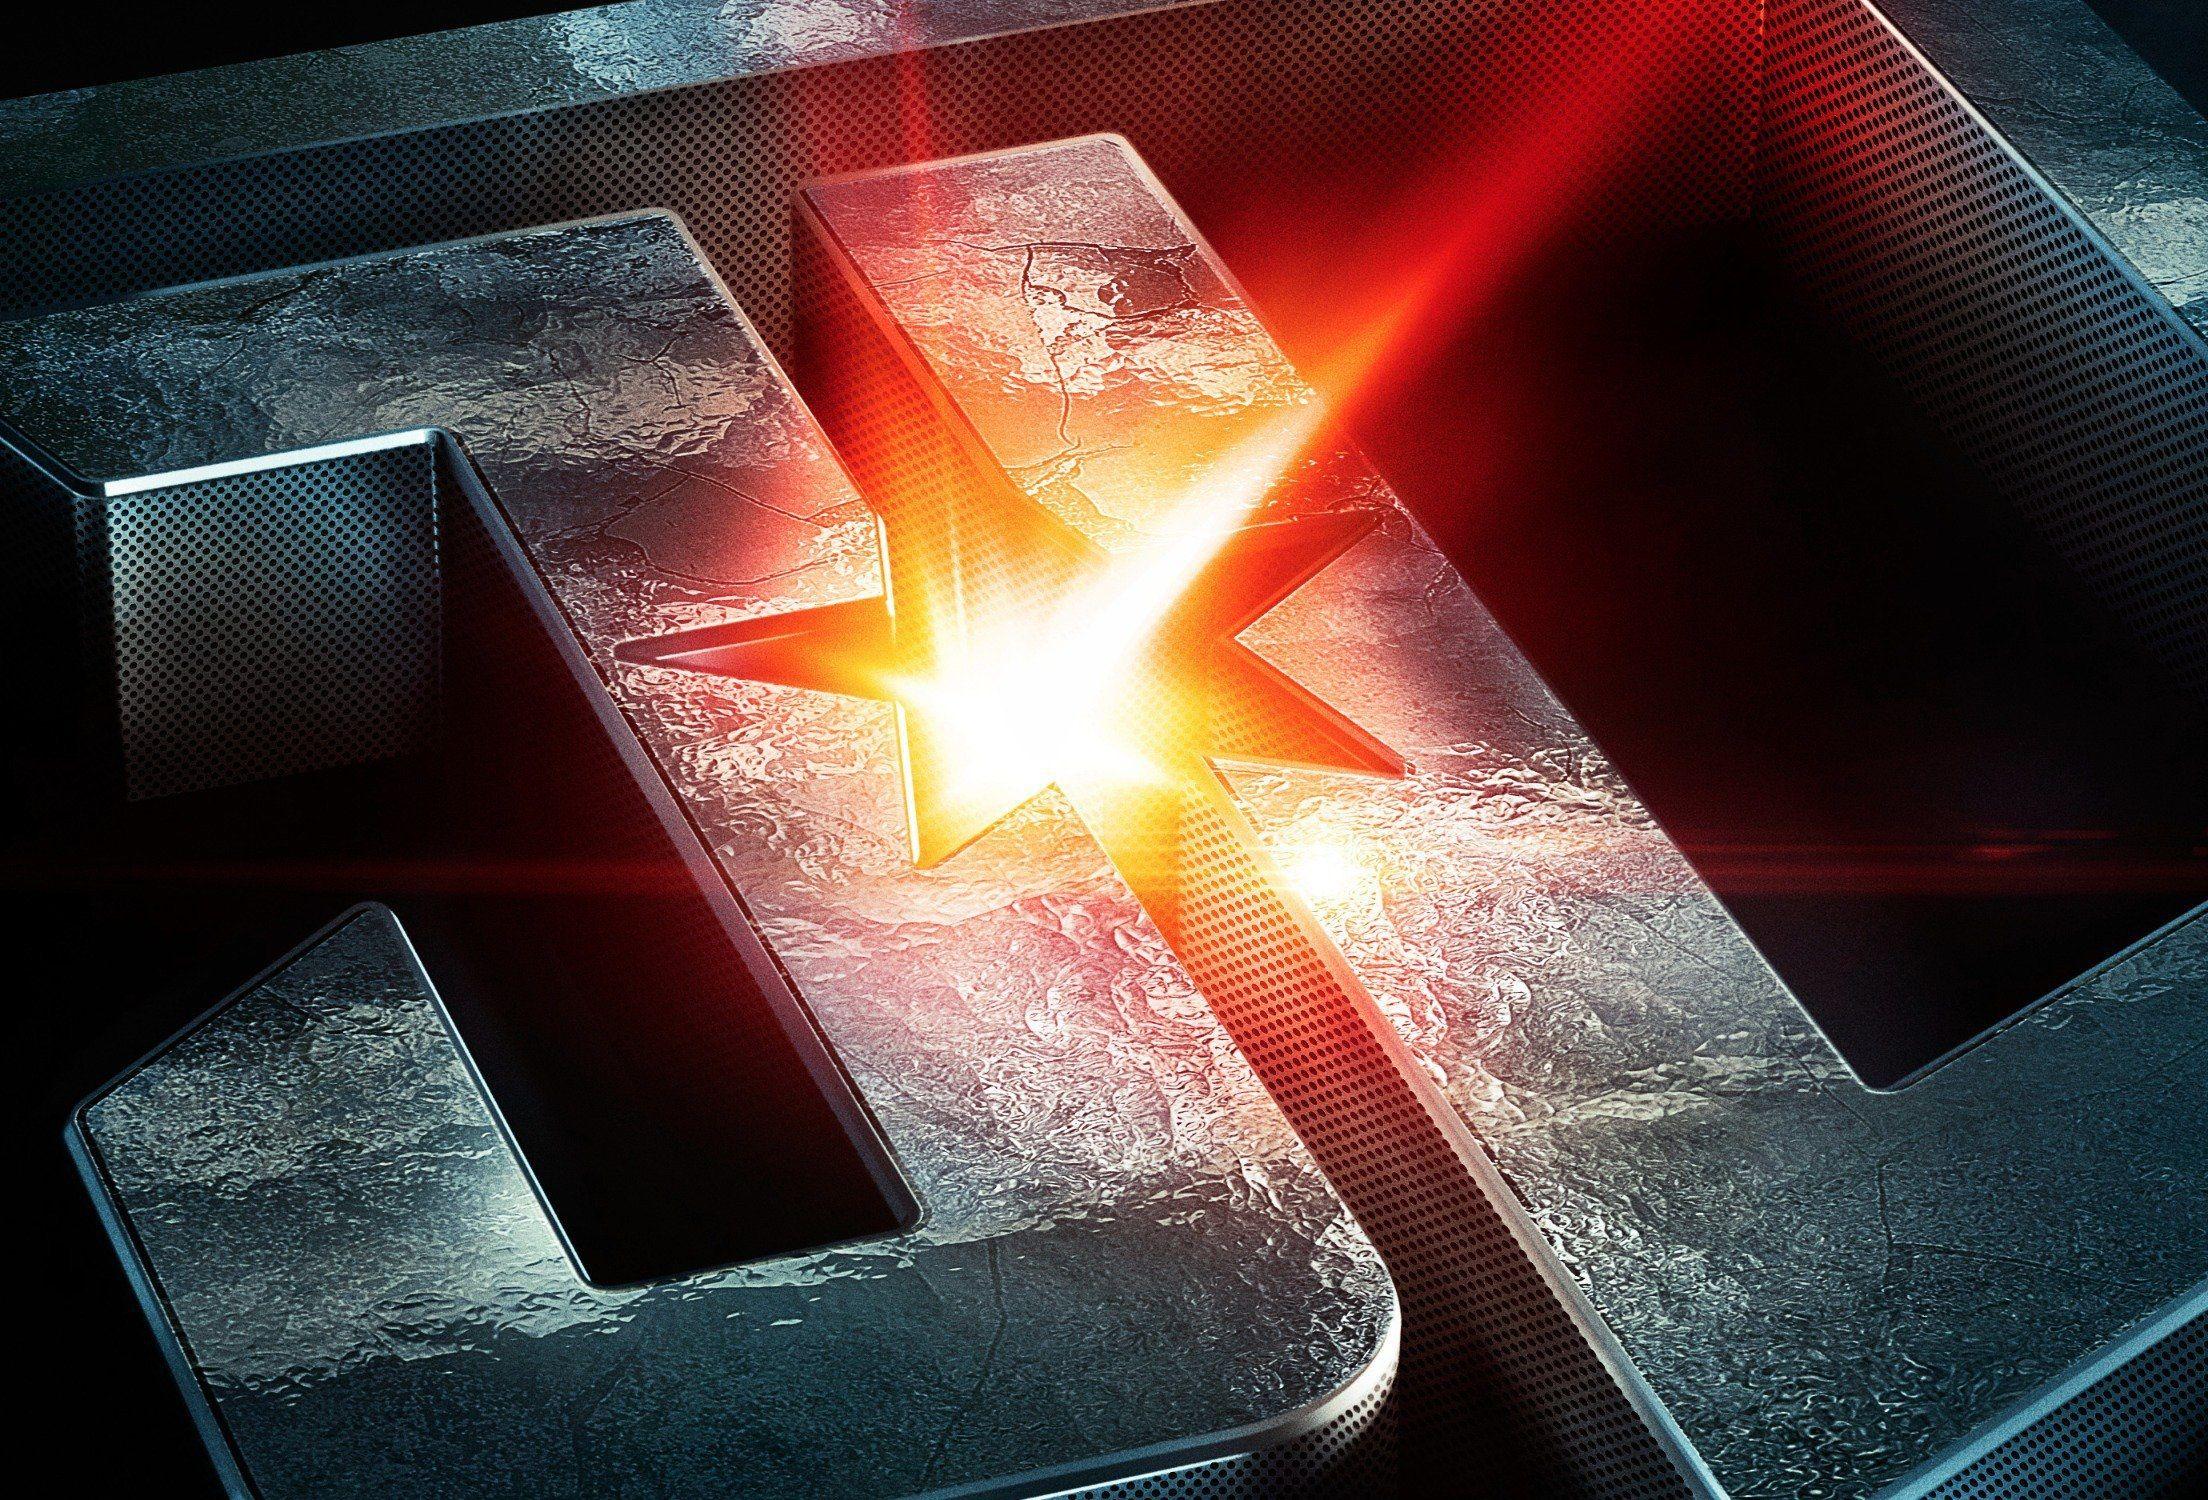 Justice League (2017) Full HD Wallpaper and Backgroundx1500